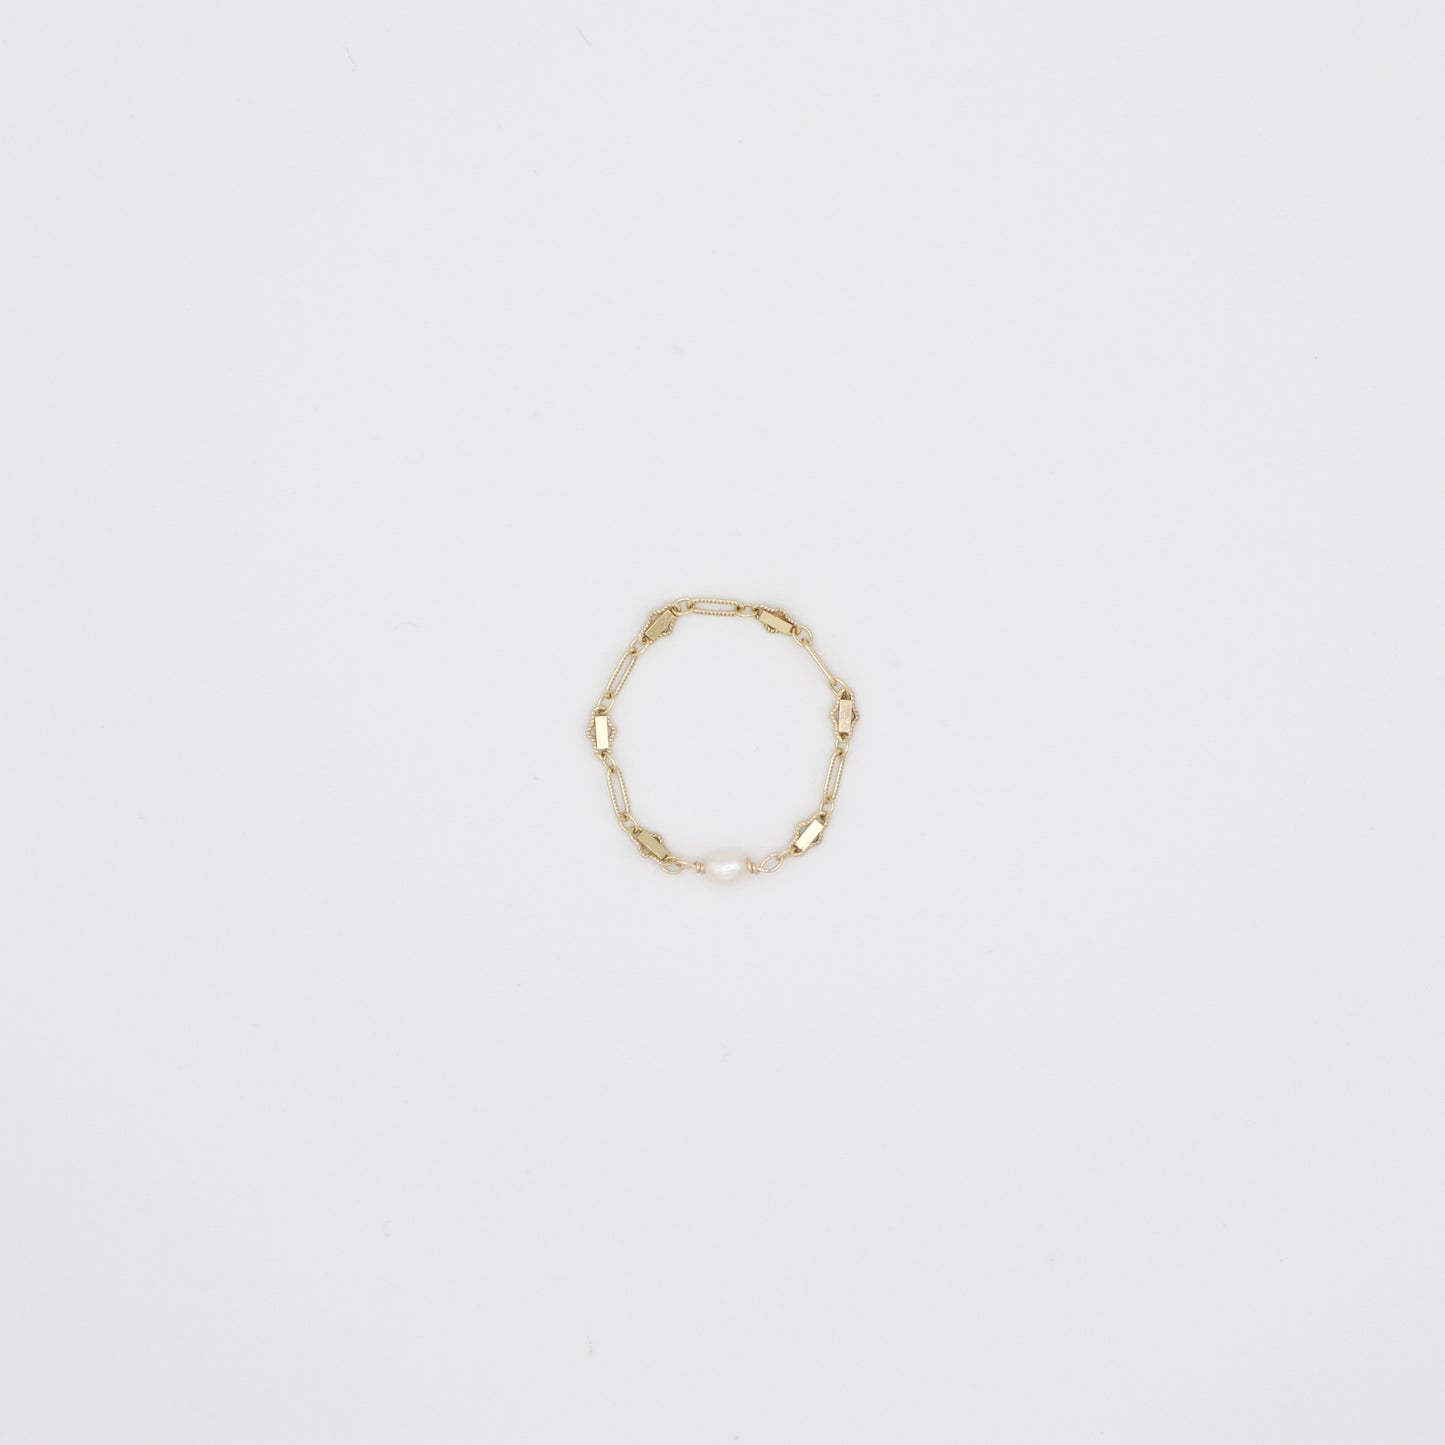 Roop Jewelry tiny pearl chain ring. Handmade 14k gold filled jewelry in Oakland, Ca.